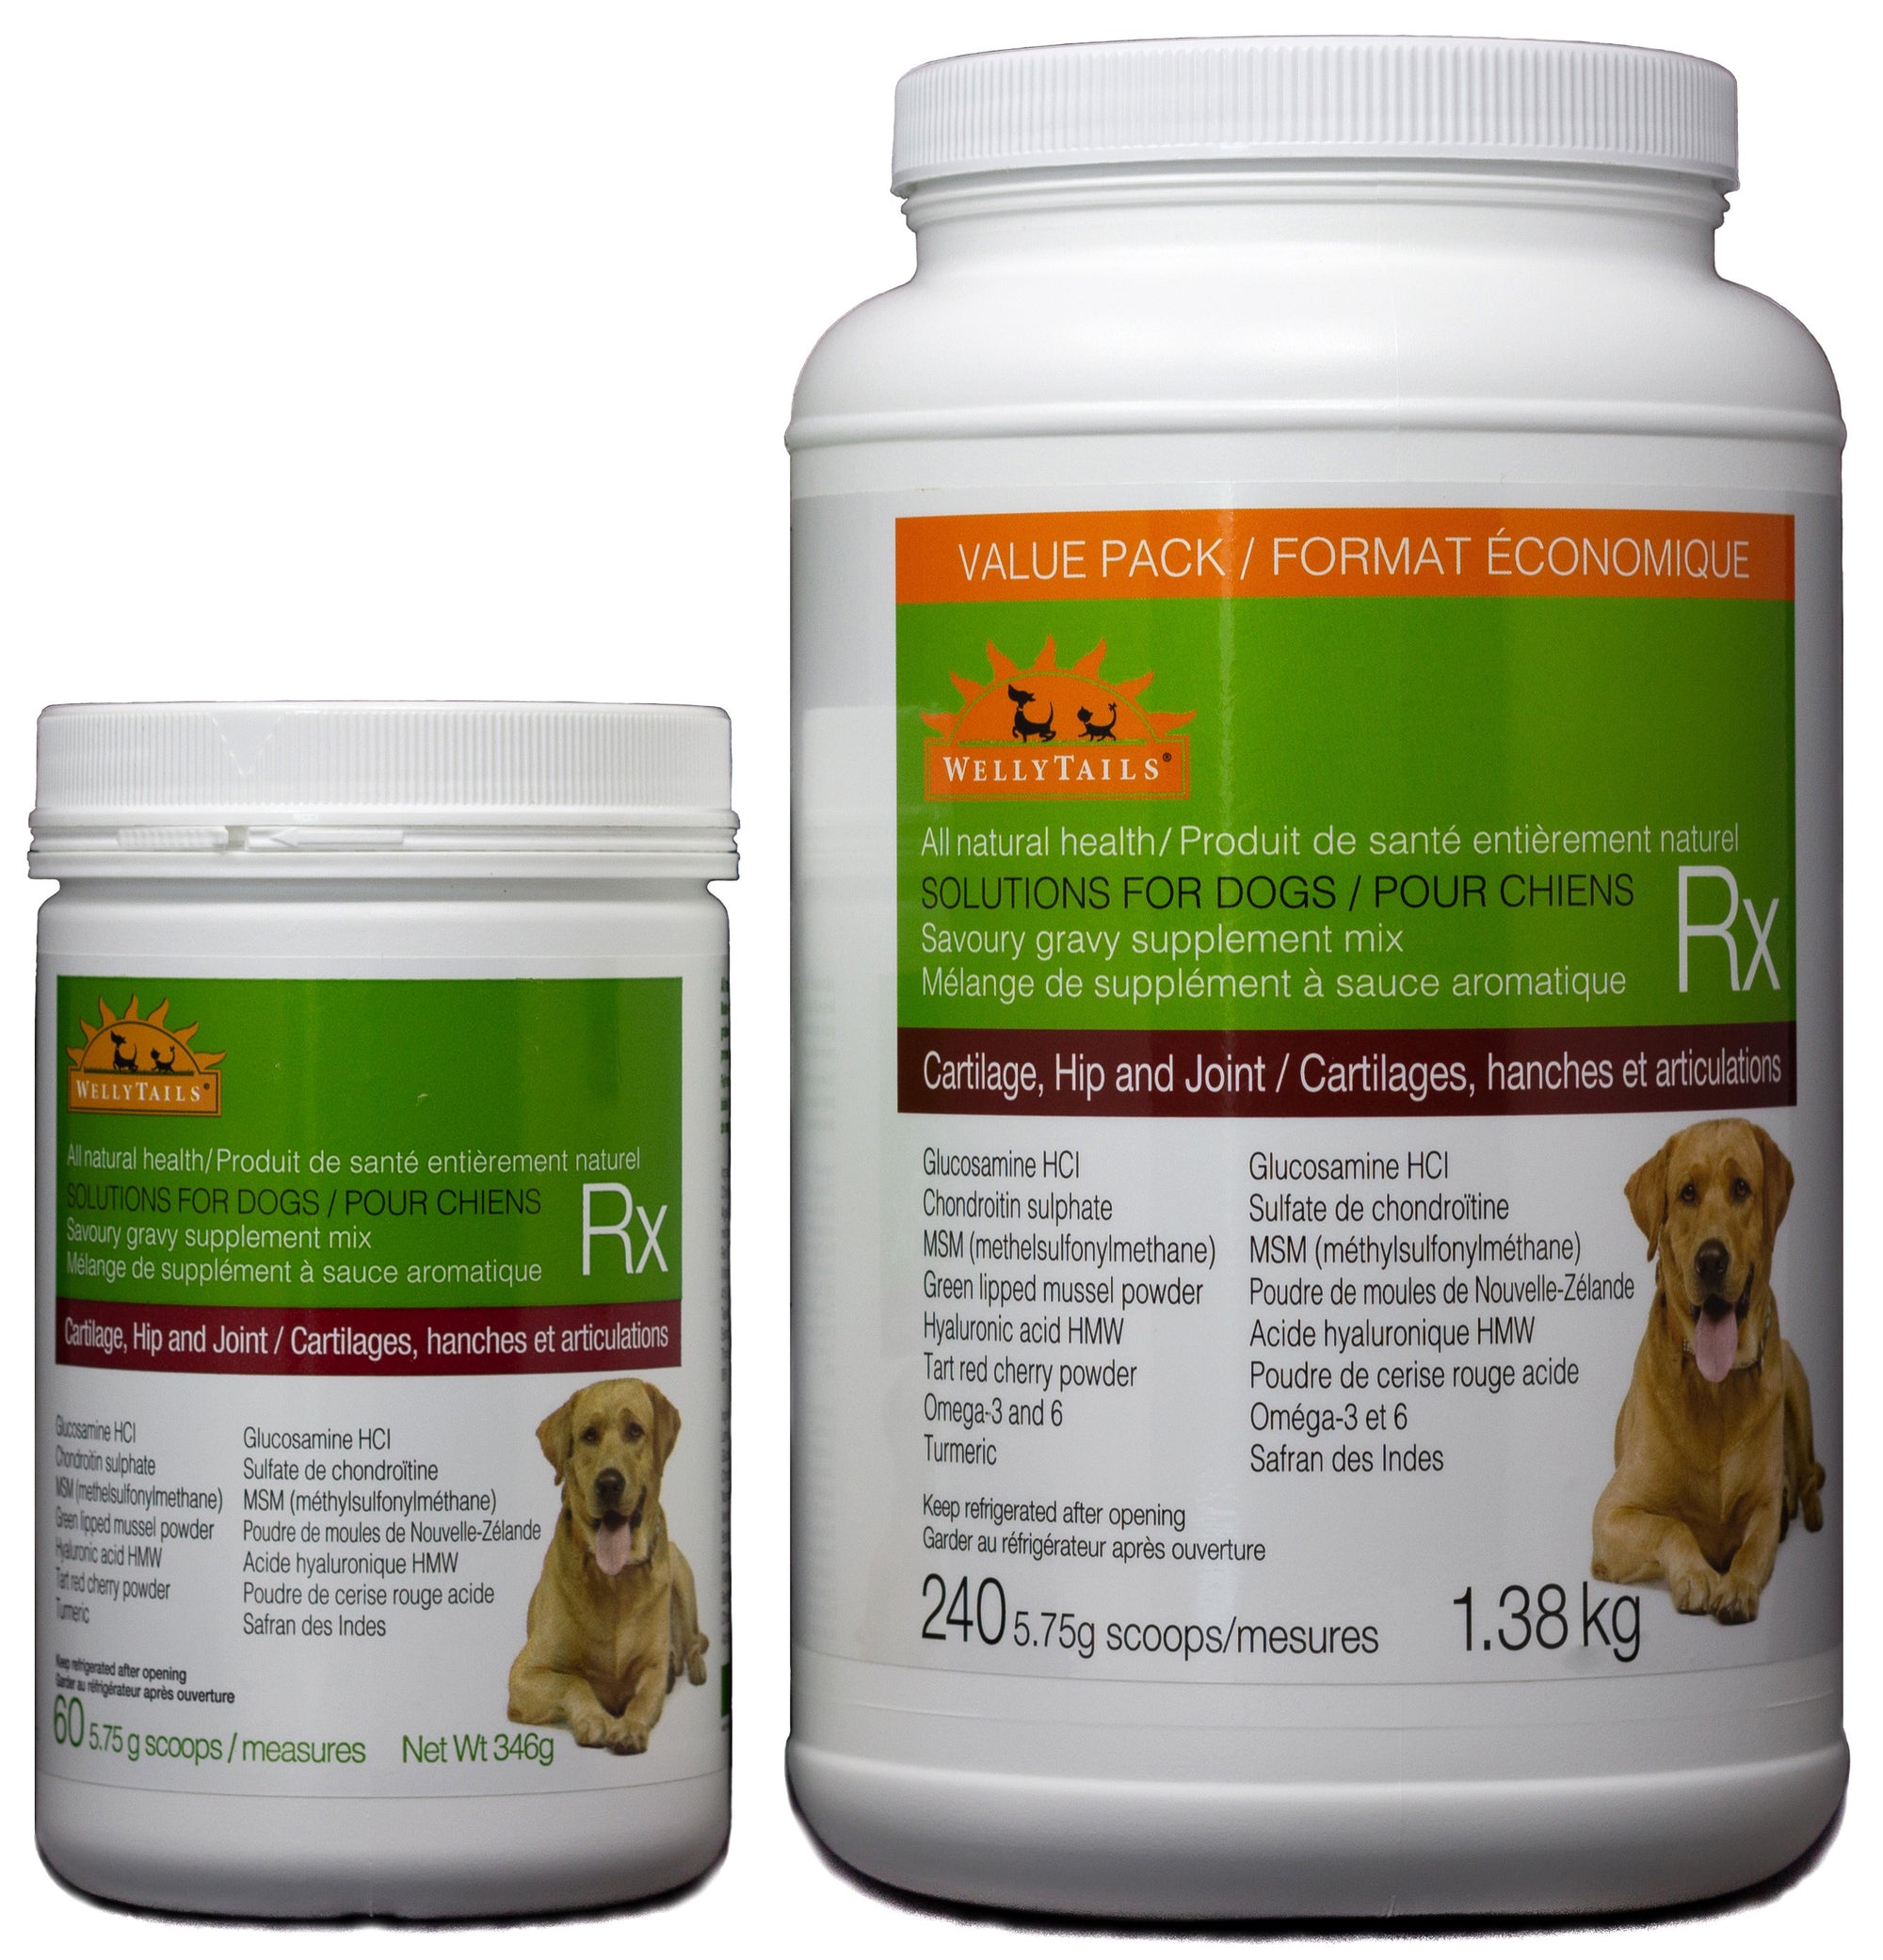 Veterinary Treatment Options for Dogs with Arthritis